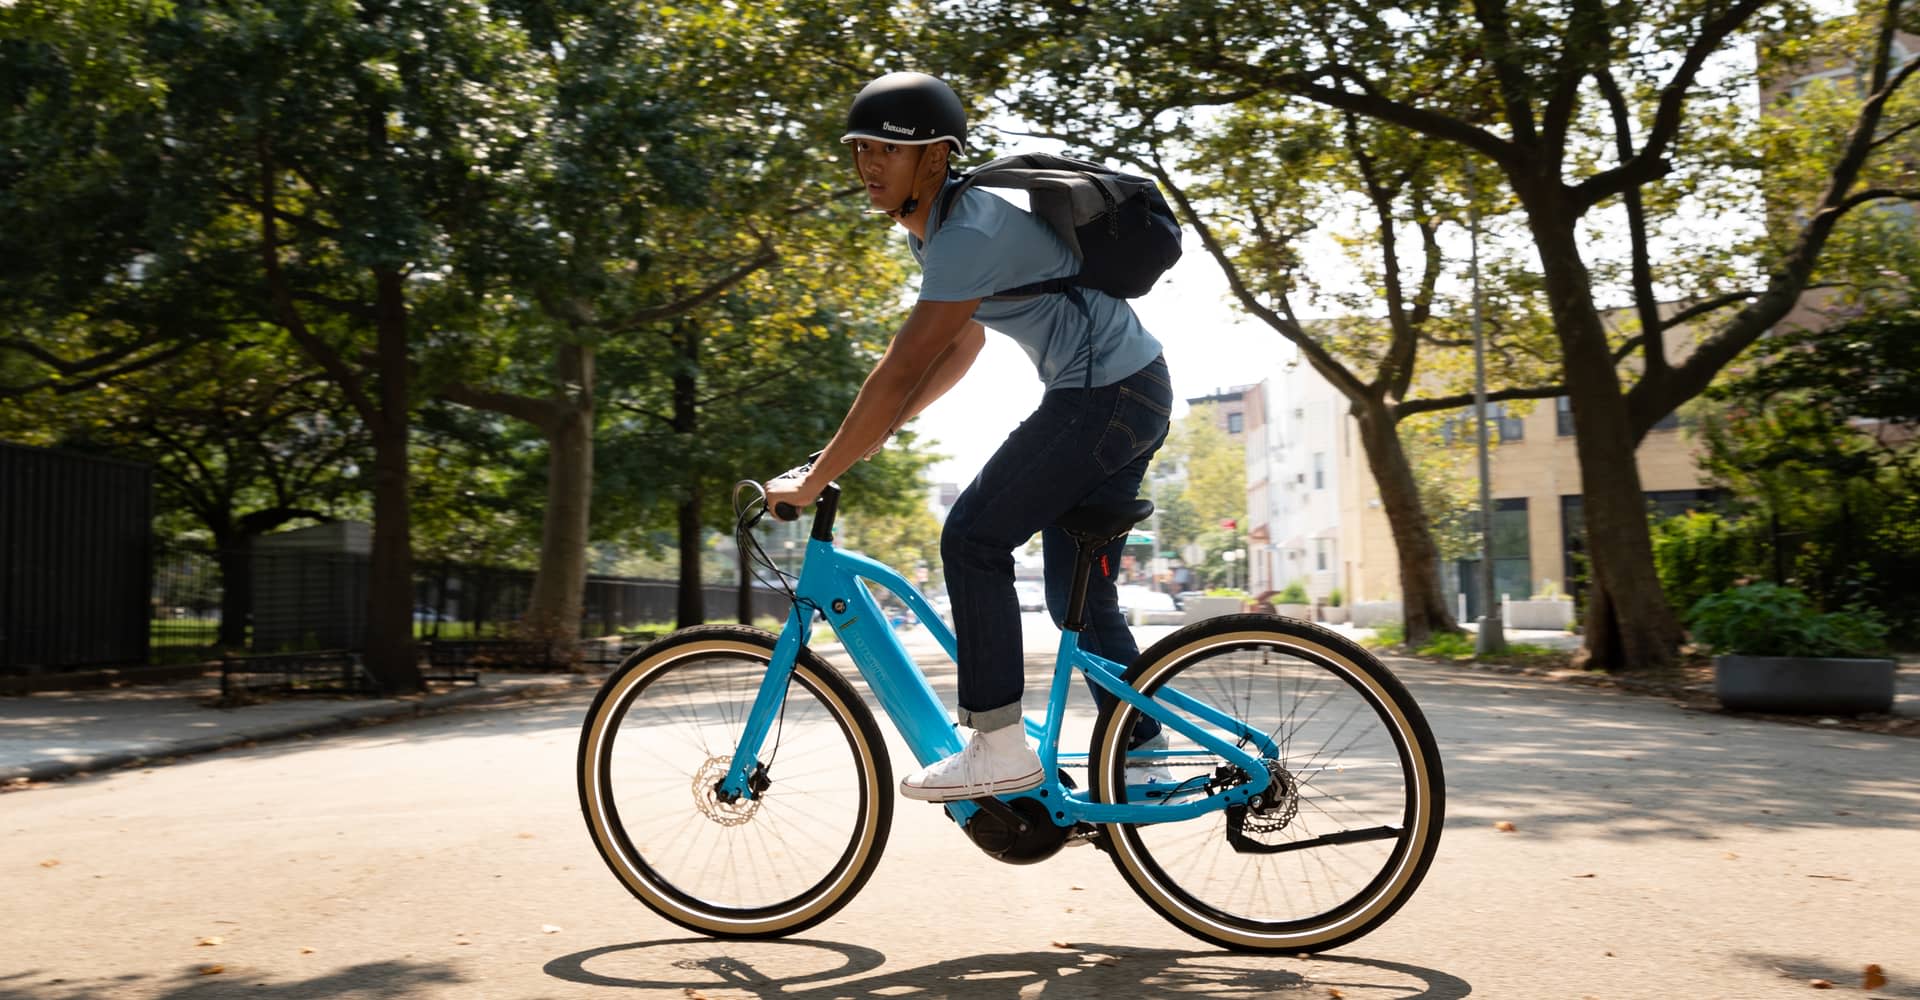 Street Legal Electric Bicycle2.0: Your Eco-Friendly Commute